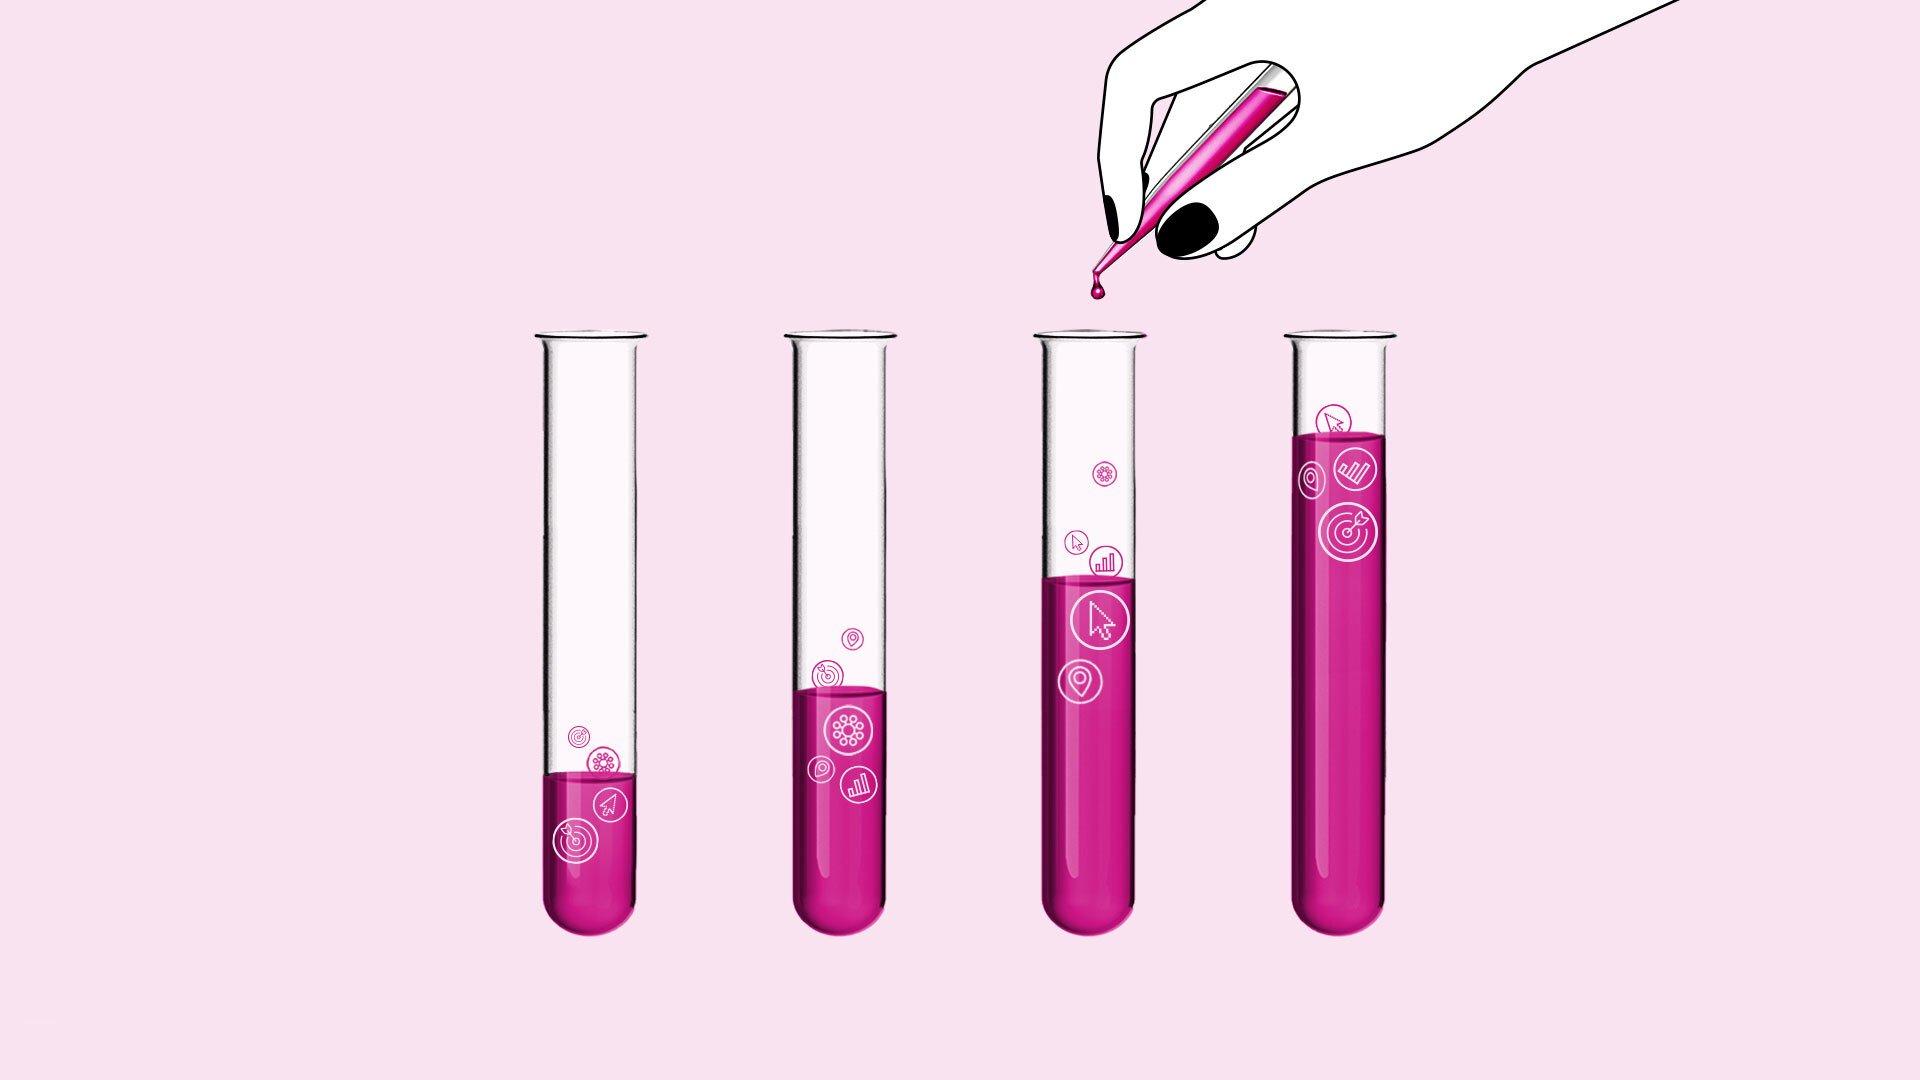 Graphic shows a hand filling four already partially filled test tubes with a pink liquid.